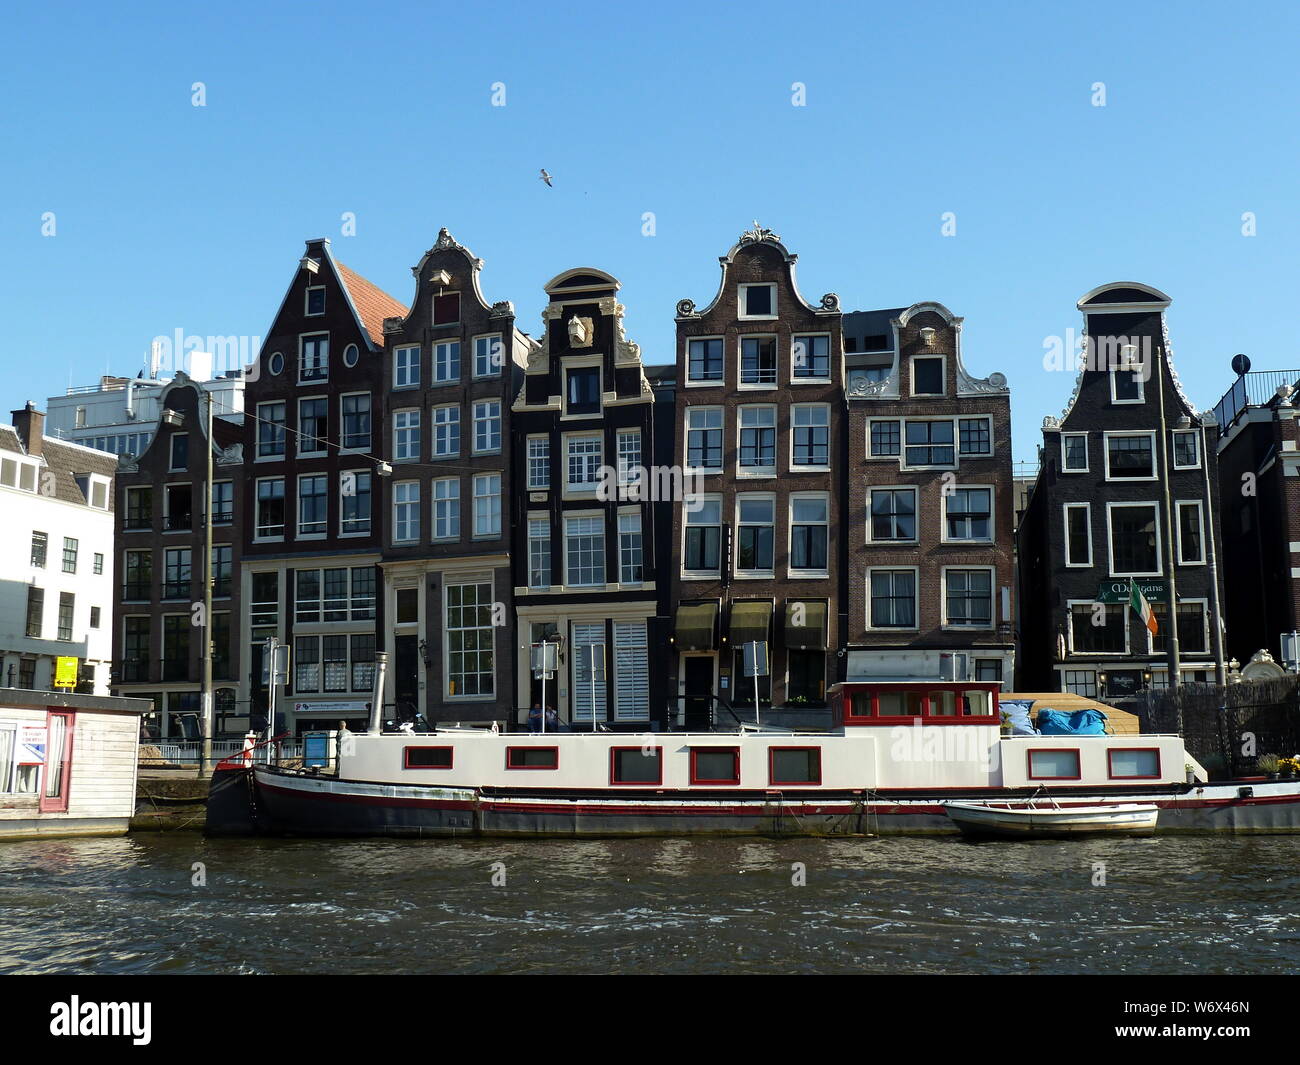 The 'drunk' houses in Amsterdam Stock Photo